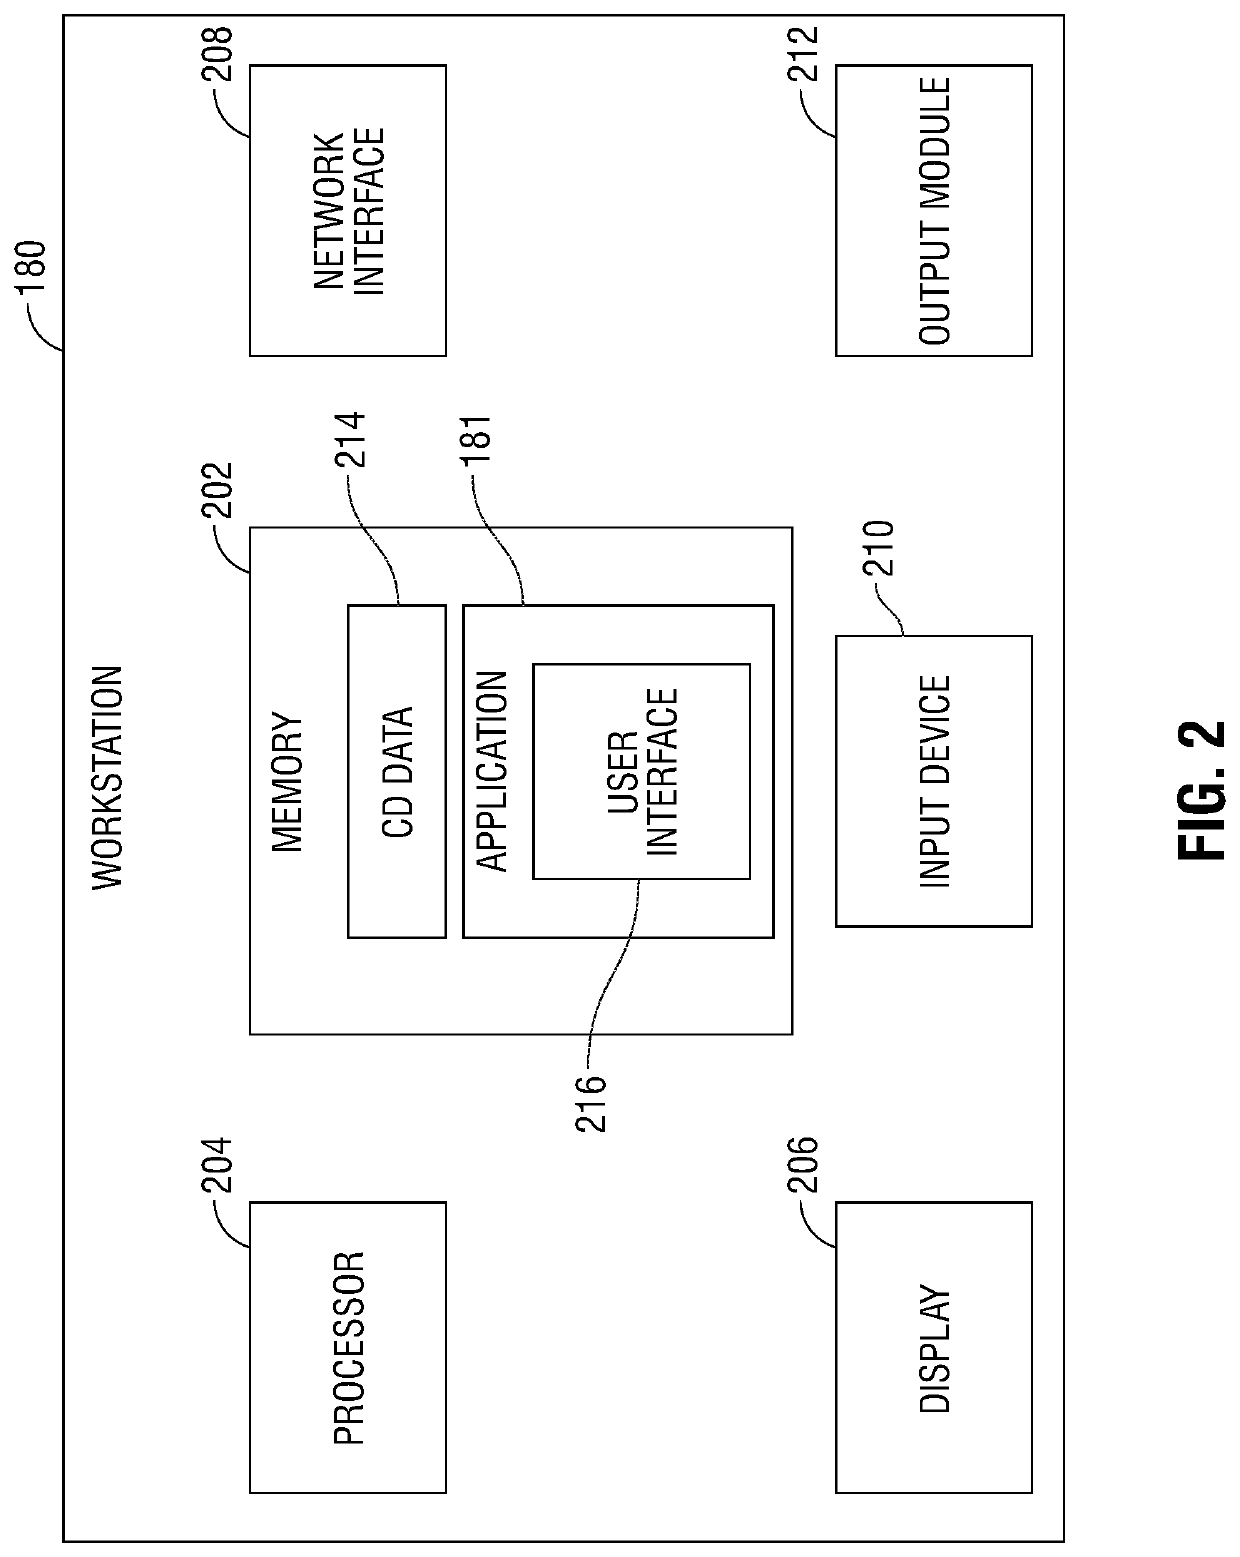 Systems, methods, and computer-readable media of providing distance, orientation feedback and motion compensation while navigating in 3D